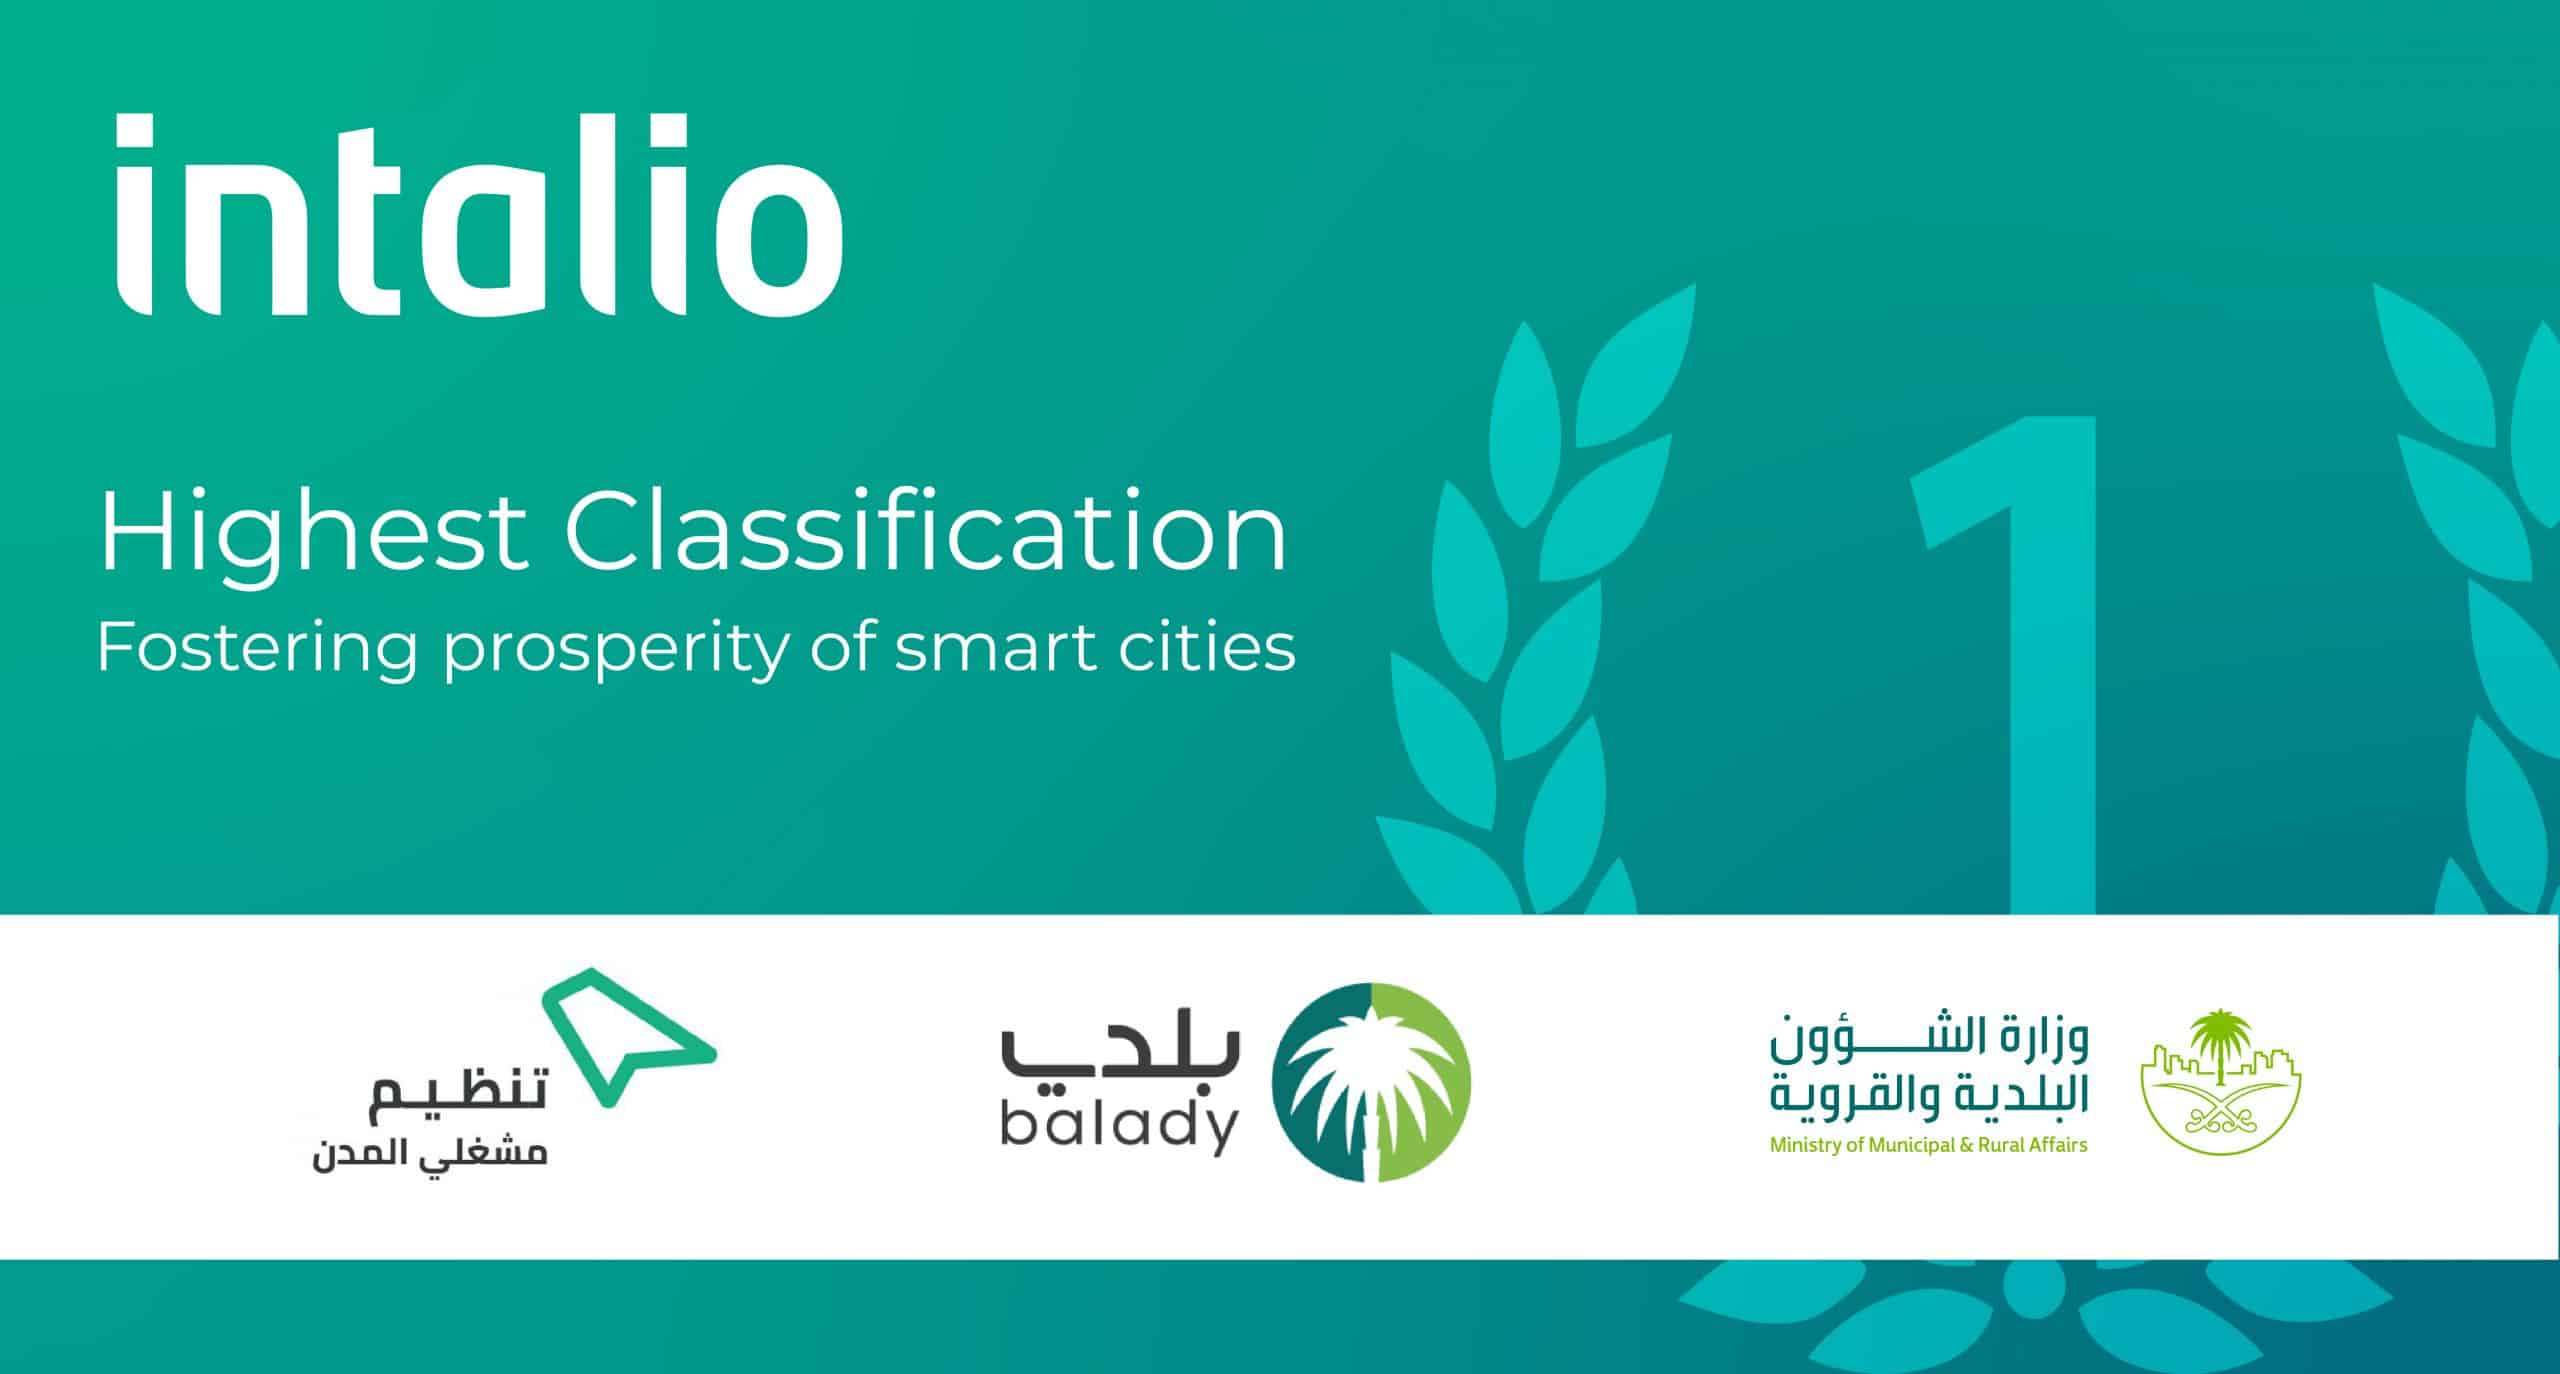 Intalio Earns Top Marks in "City Service Providers" Classification in KSA